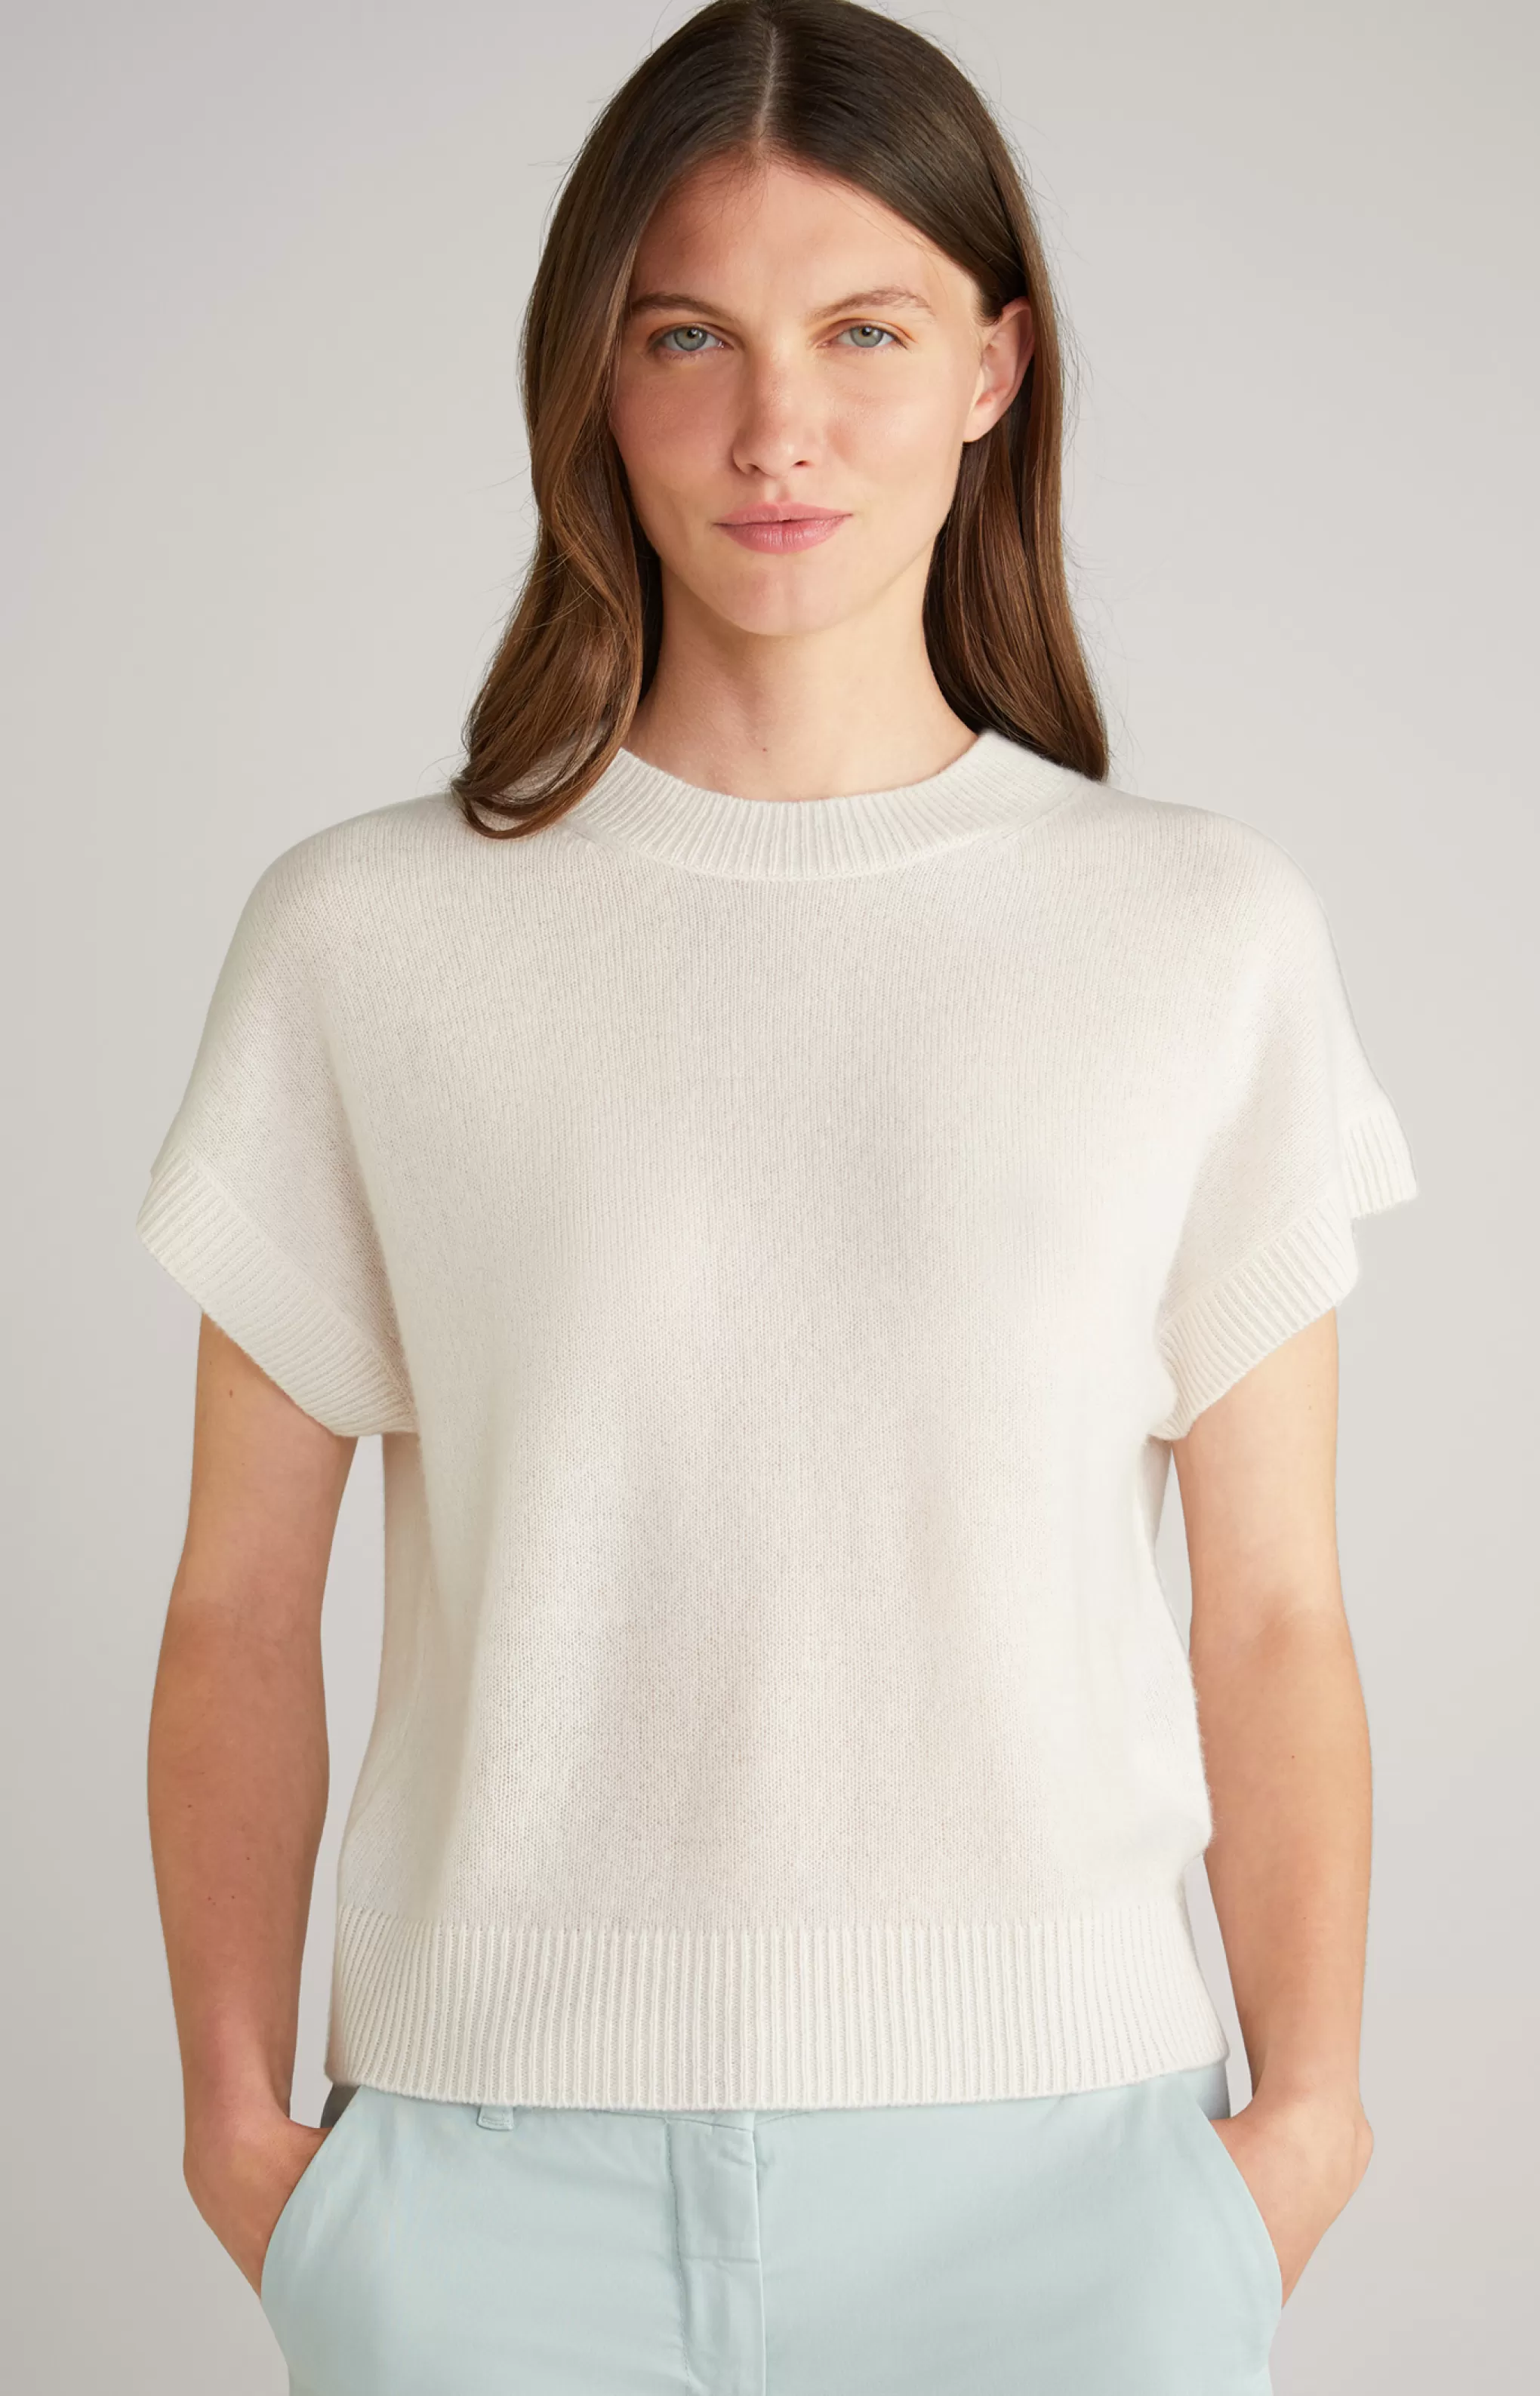 Knitwear | Clothing*JOOP Knitwear | Clothing Cashmere Knitted Pullover in